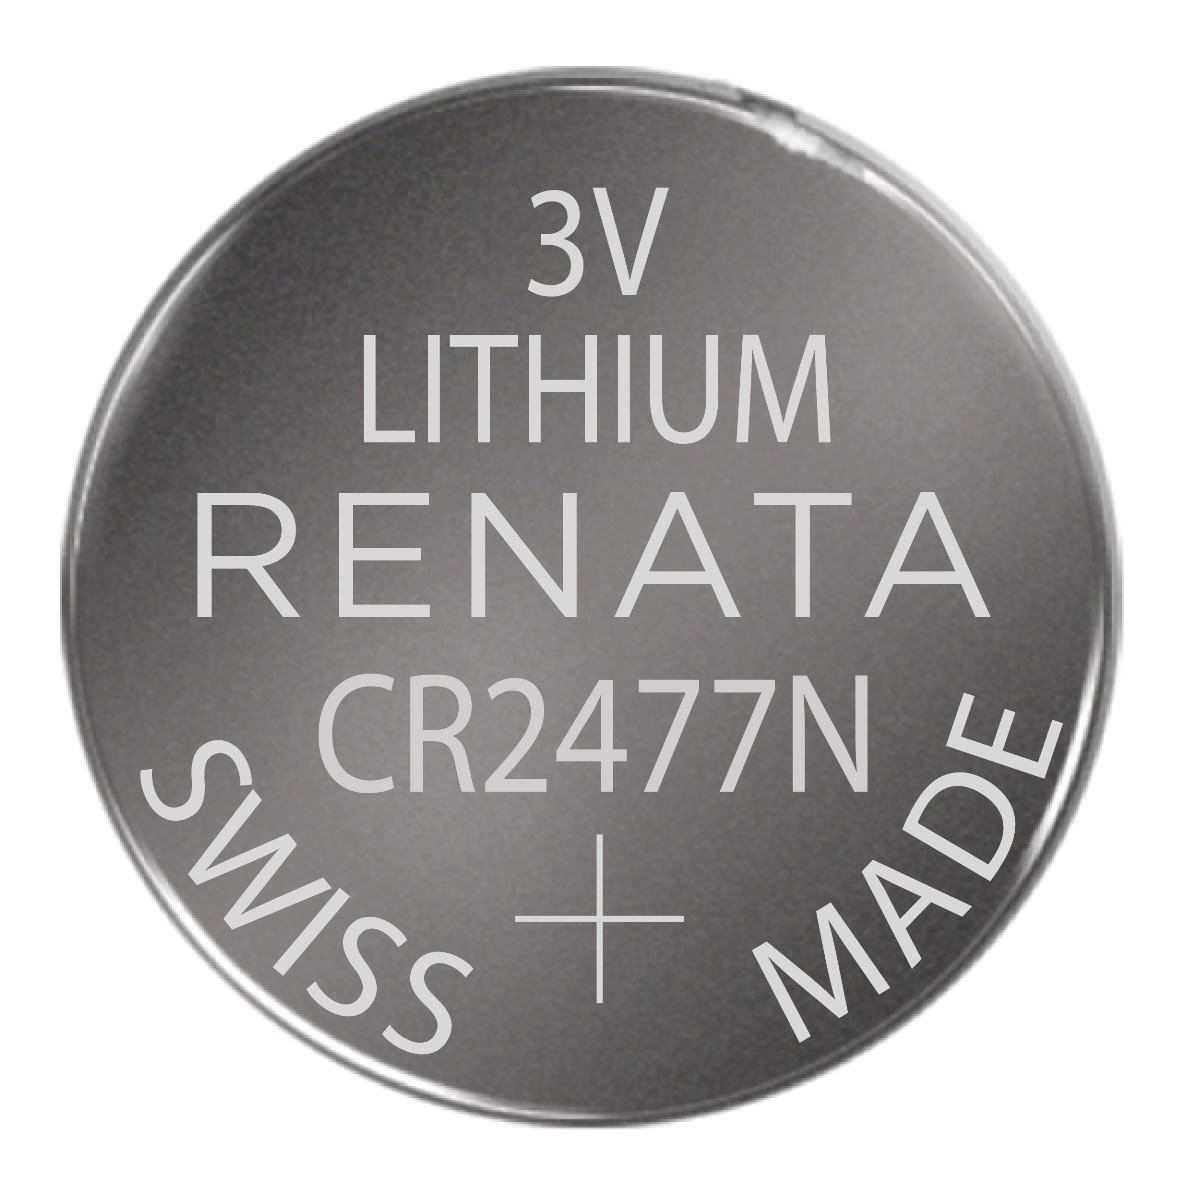 Renata Lithium Battery for Toy CR 2450 N, Voltage: 3 V at Rs 115